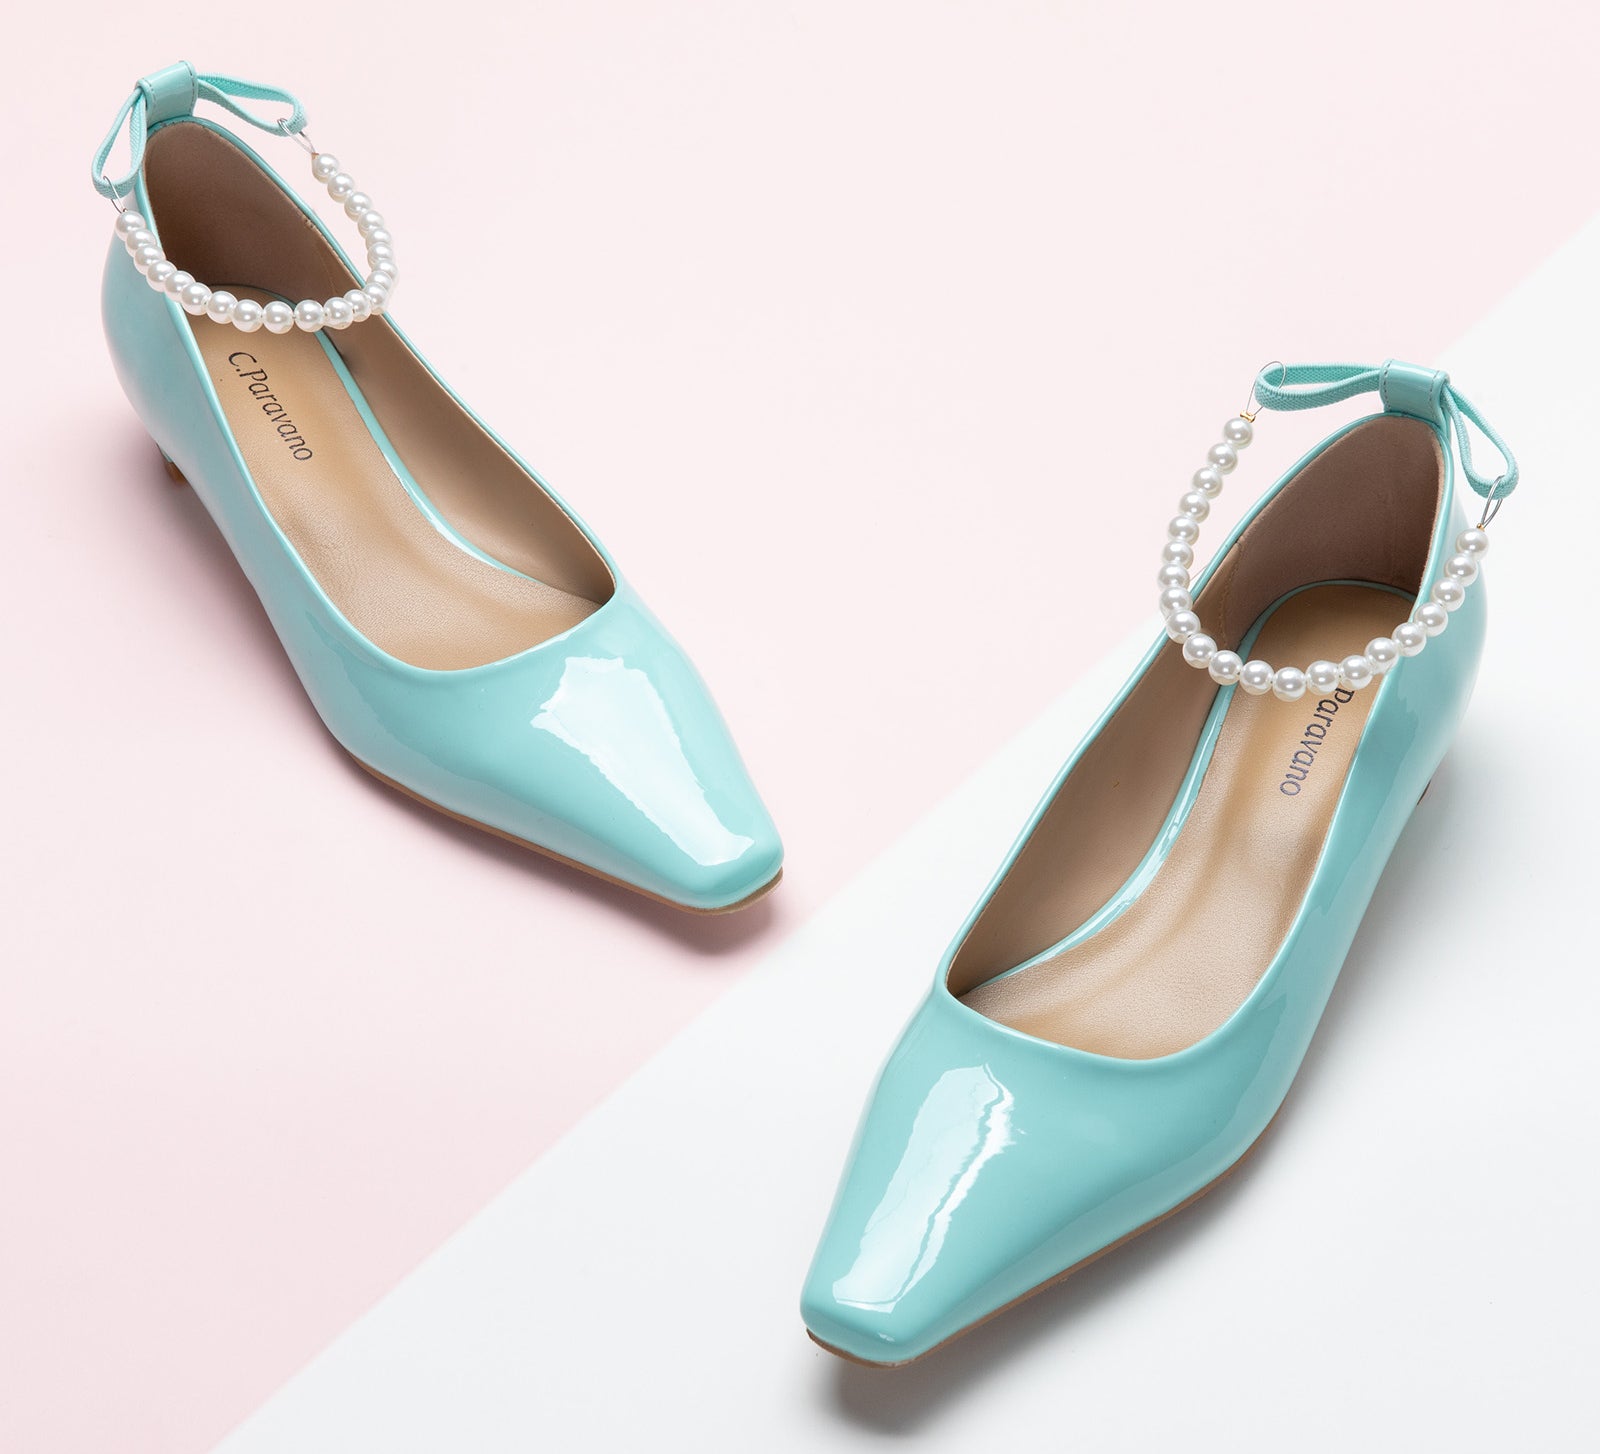 Pearl Straps Low Heel in Mint, featuring delicate pearl details for a soft and sophisticated style